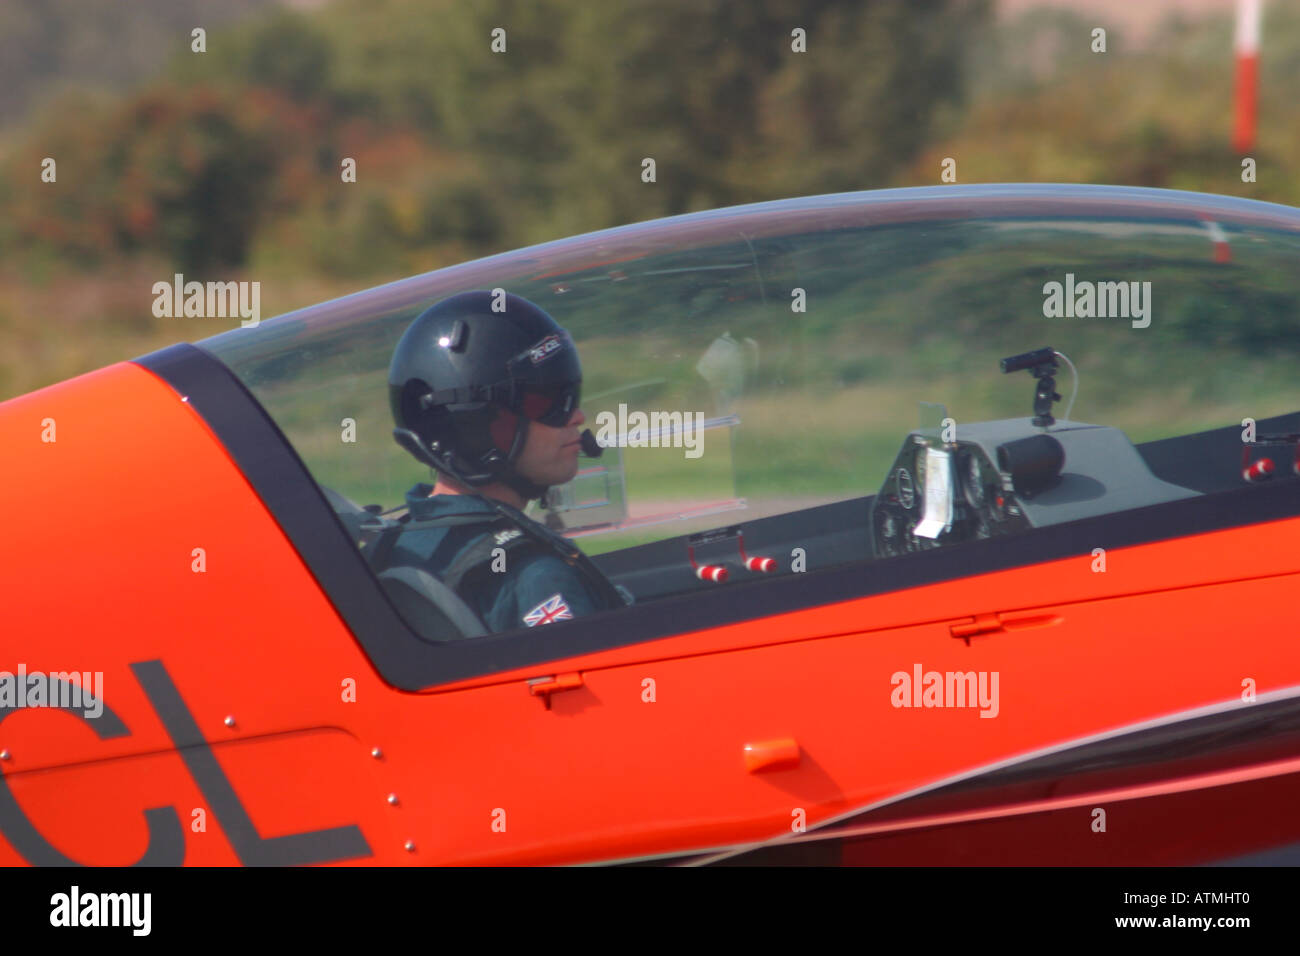 Piloting an Extra 300LP fixed wing landplane as part of the Blades Aerobatic Display Team Stock Photo